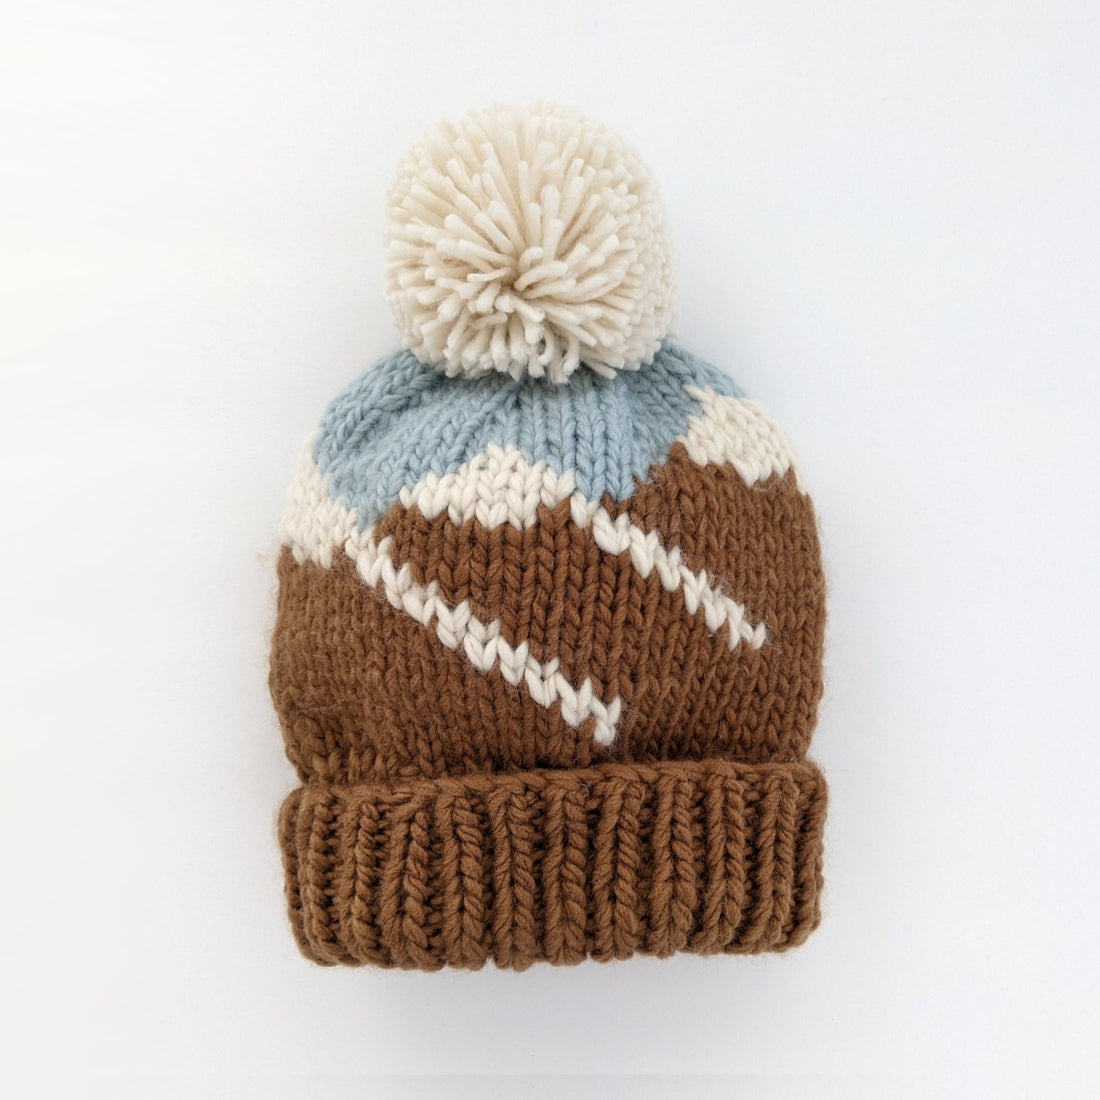 Huggalugs mountain hand knit beanie hat against white backdrop